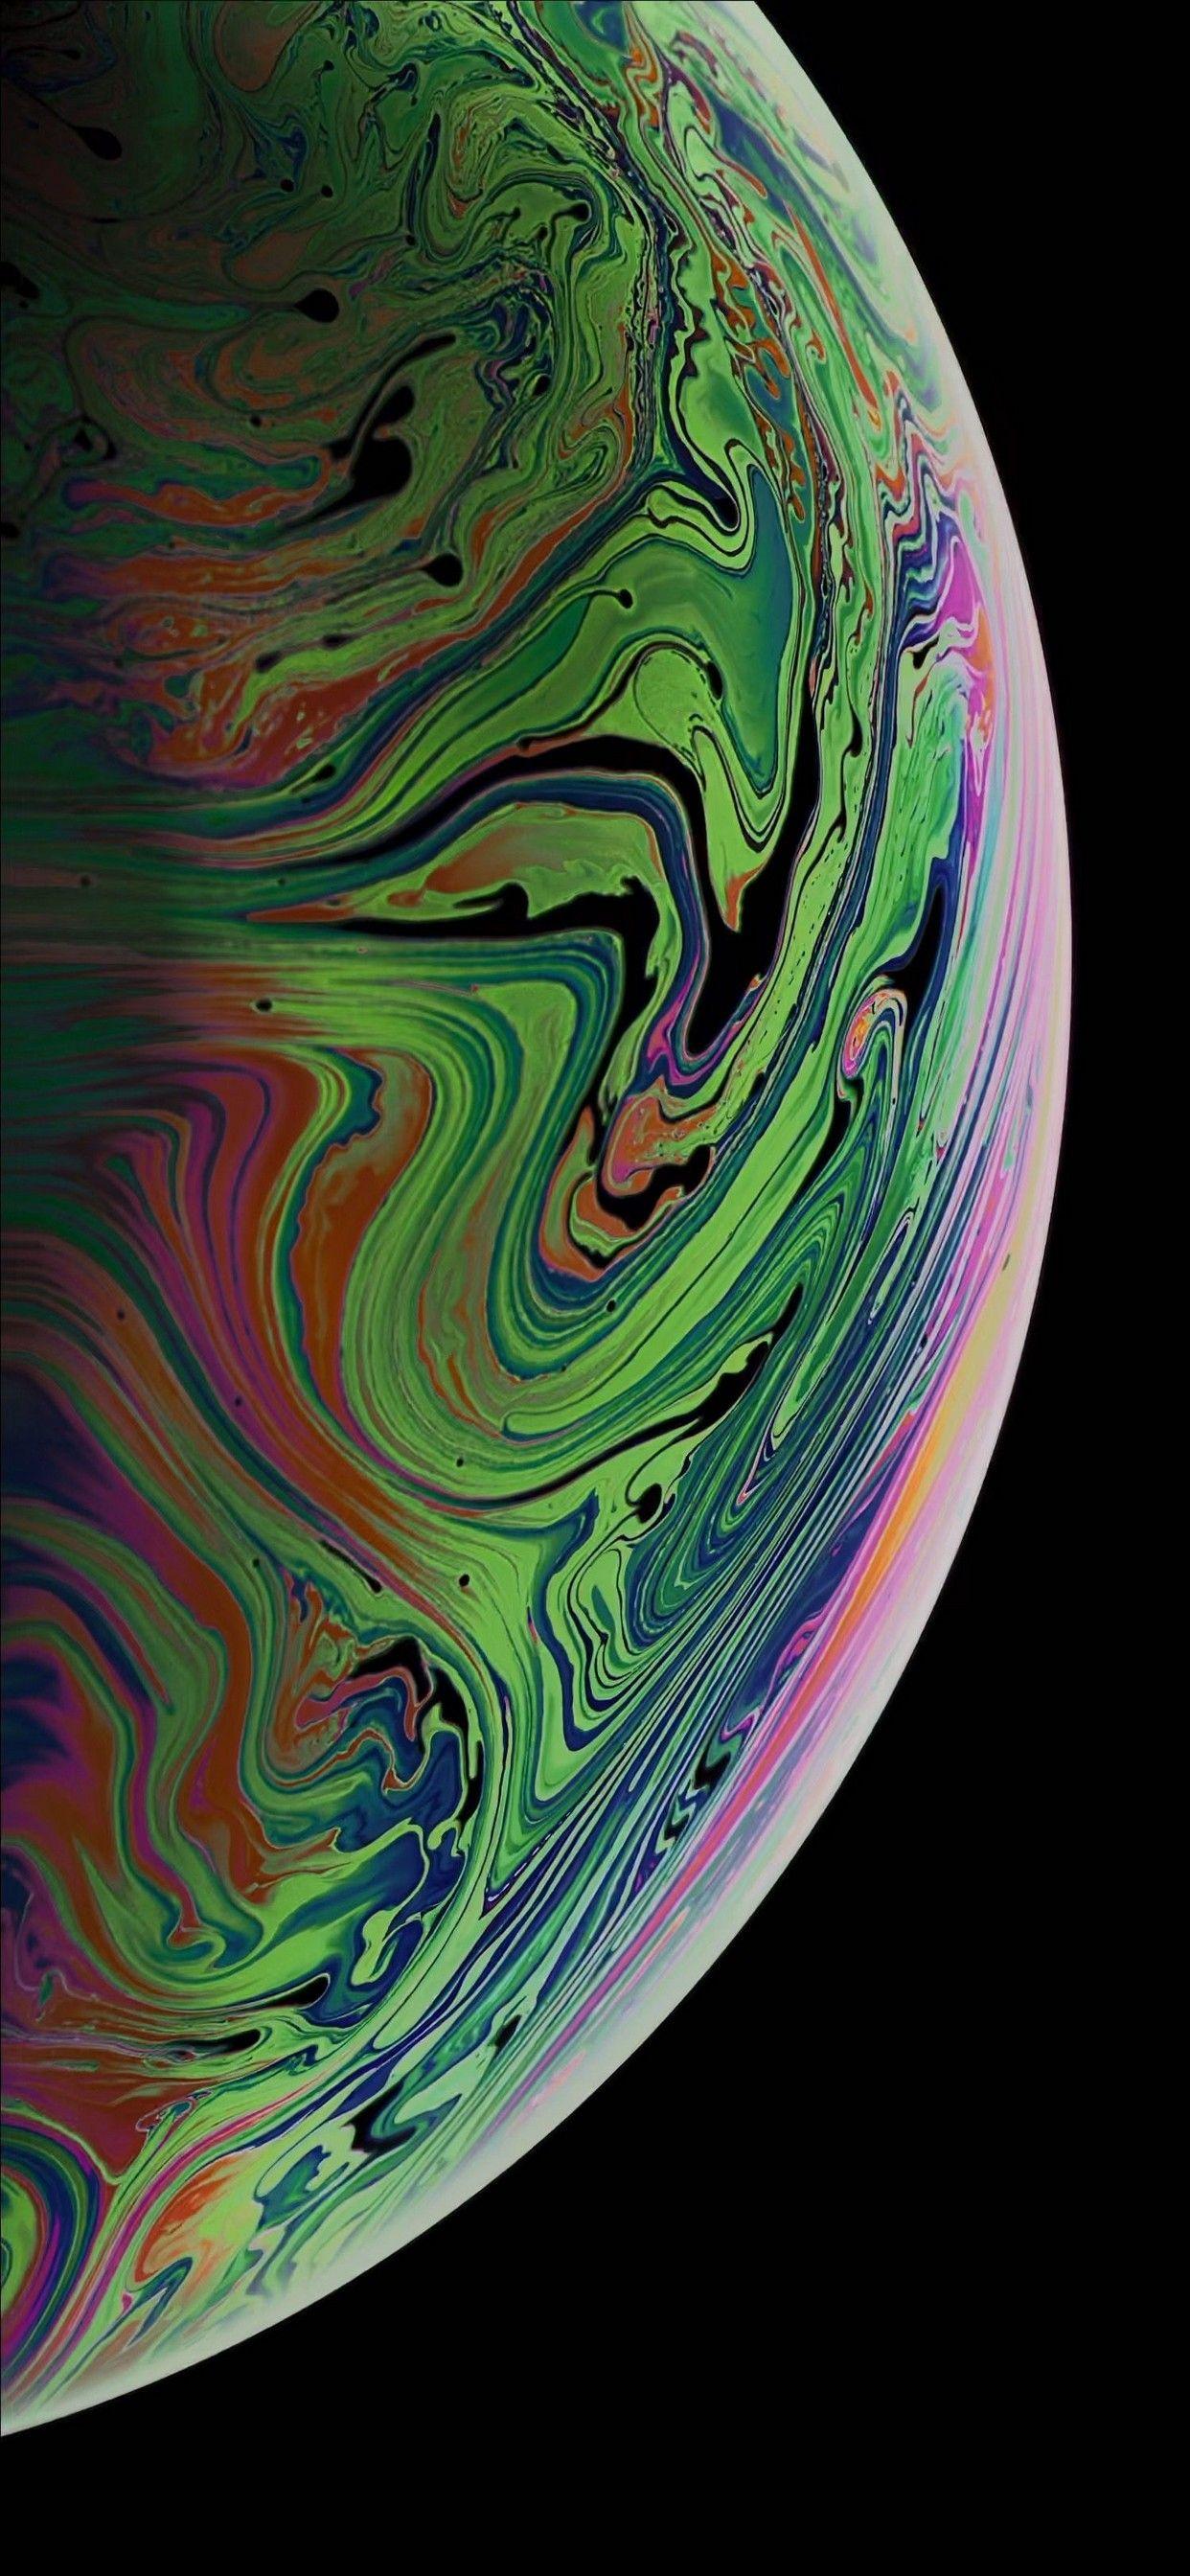 Iphone xs max k hd wallpapers